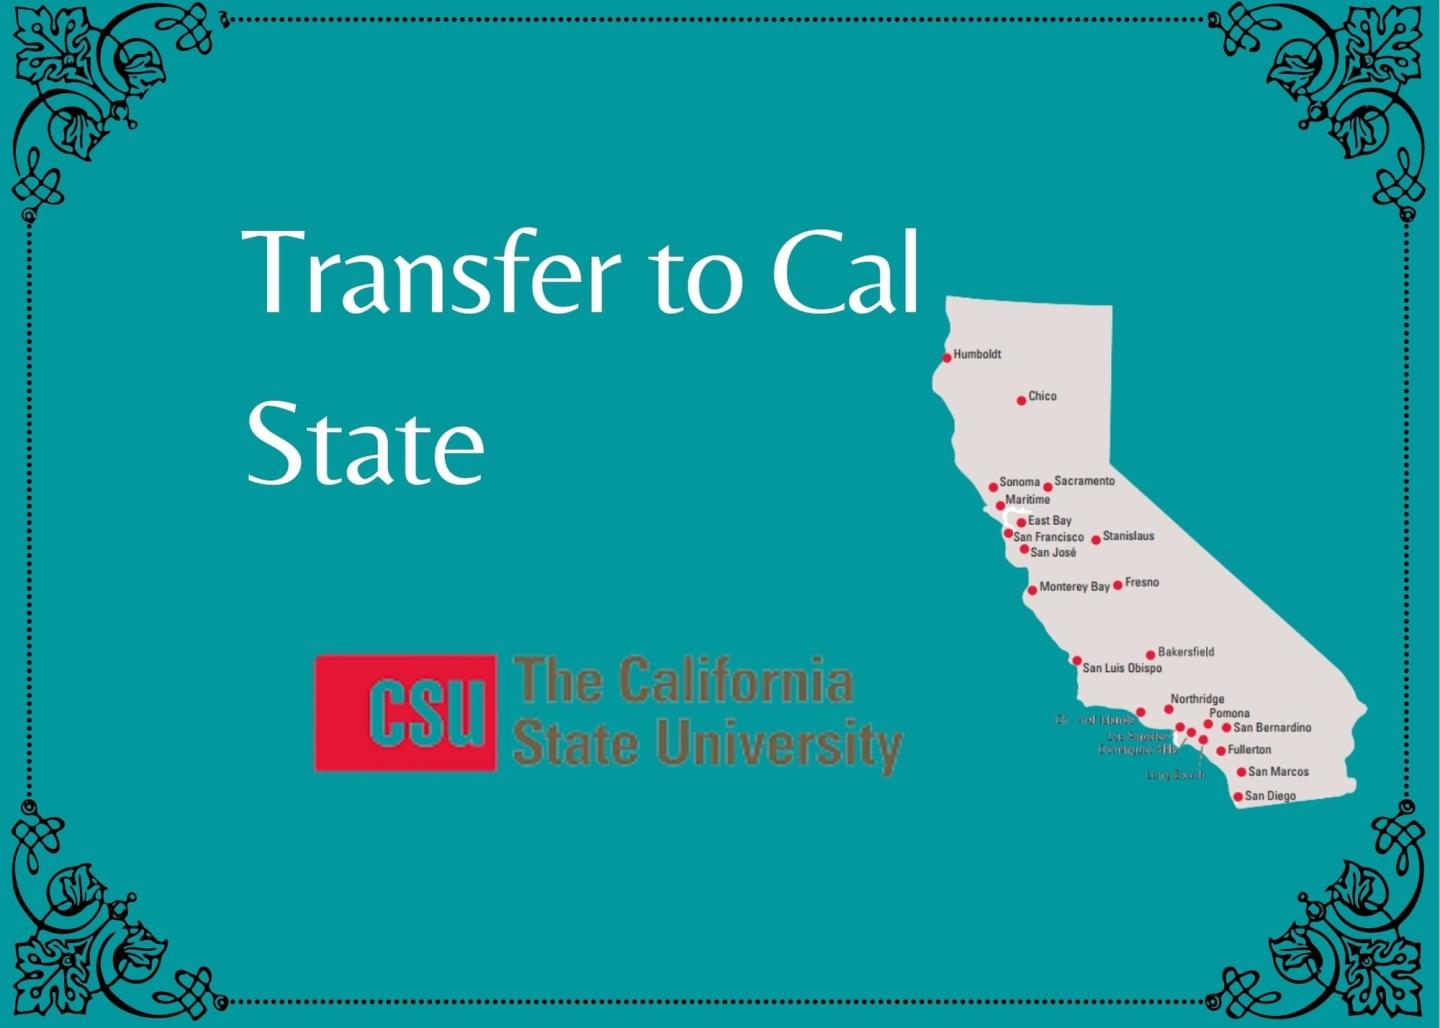 Transfer to Cal State